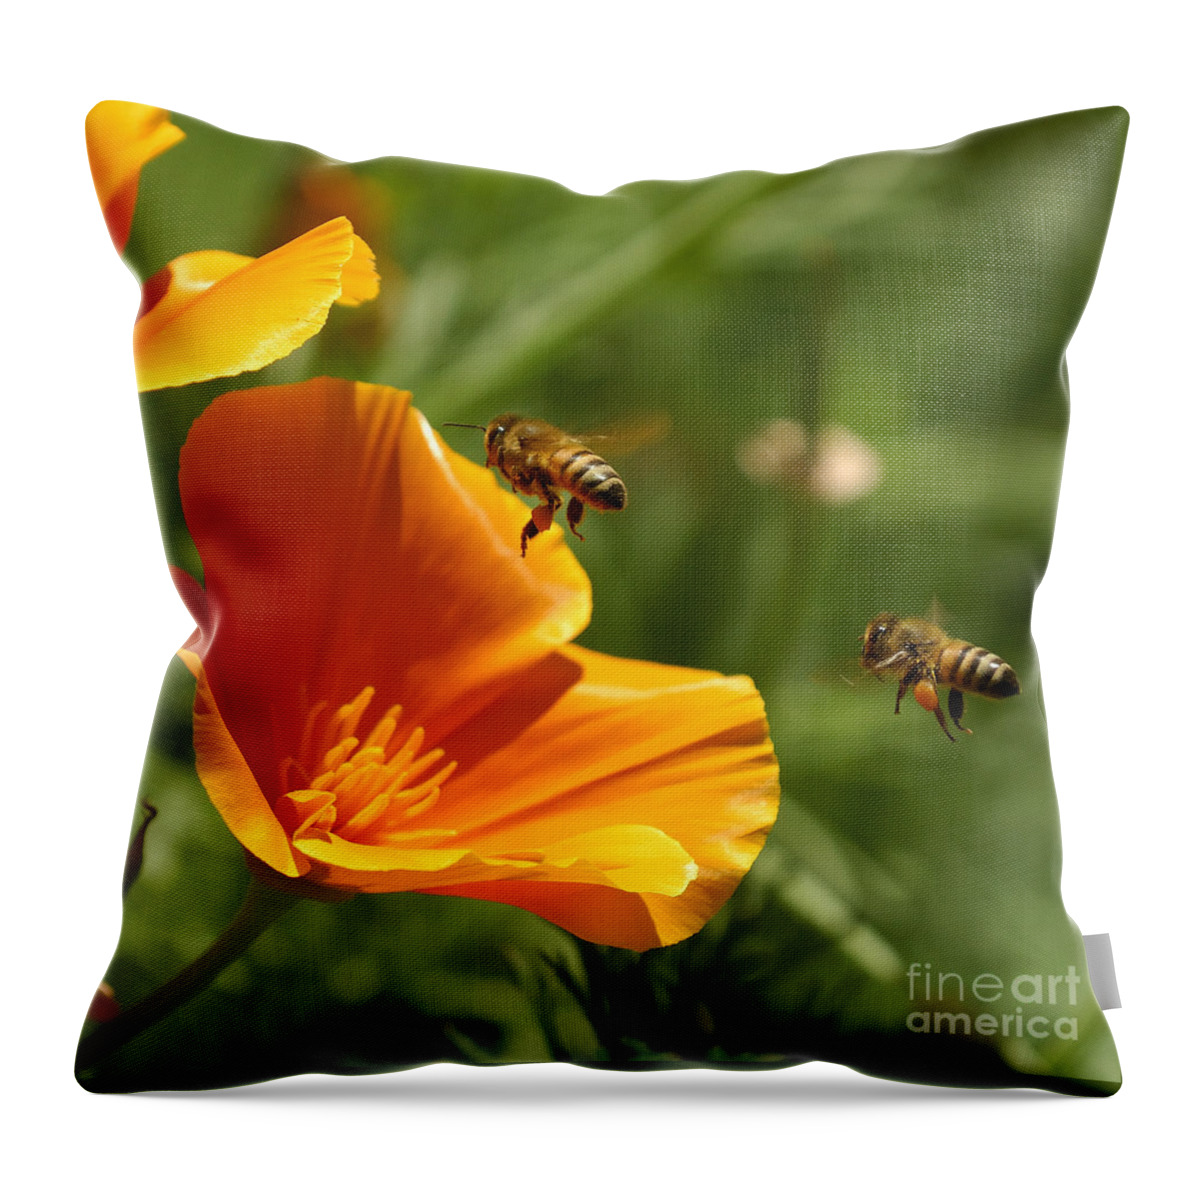 California Poppy And Bees Throw Pillow featuring the photograph Poppy and Bees by Marc Bittan